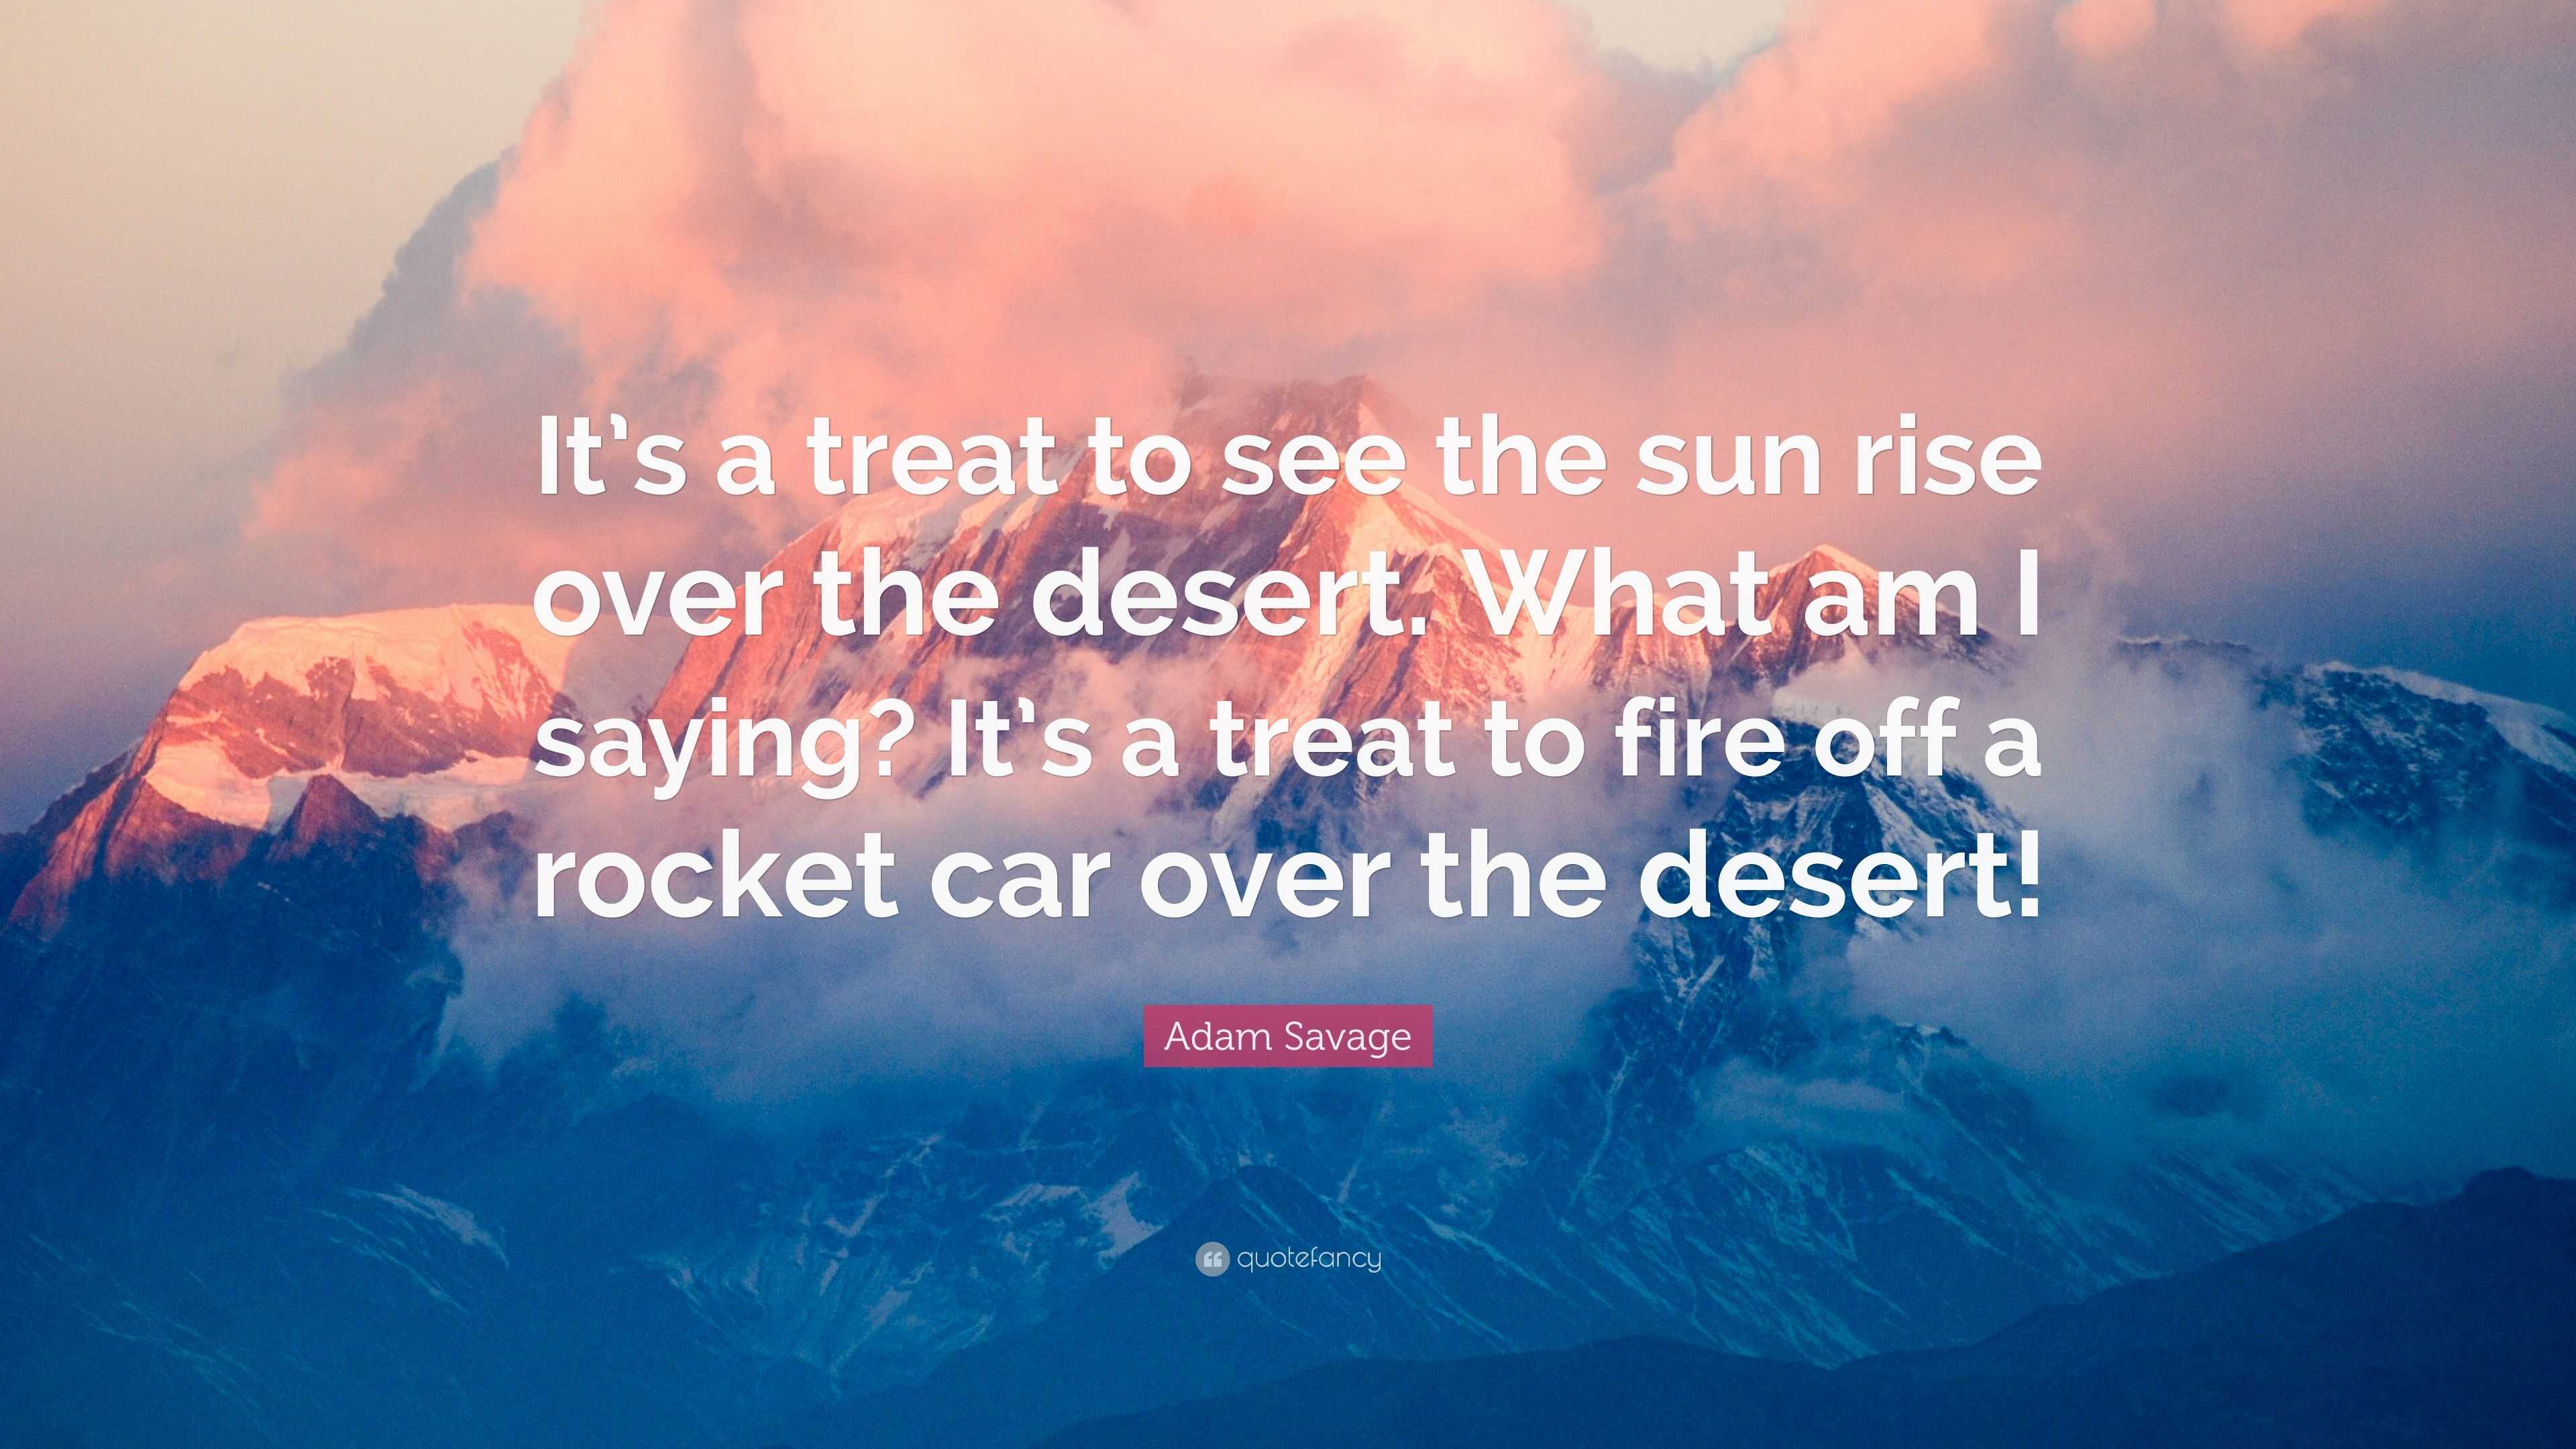 https://quotefancy.com/media/wallpaper/3840x2160/3379386-Adam-Savage-Quote-It-s-a-treat-to-see-the-sun-rise-over-the-desert.jpg